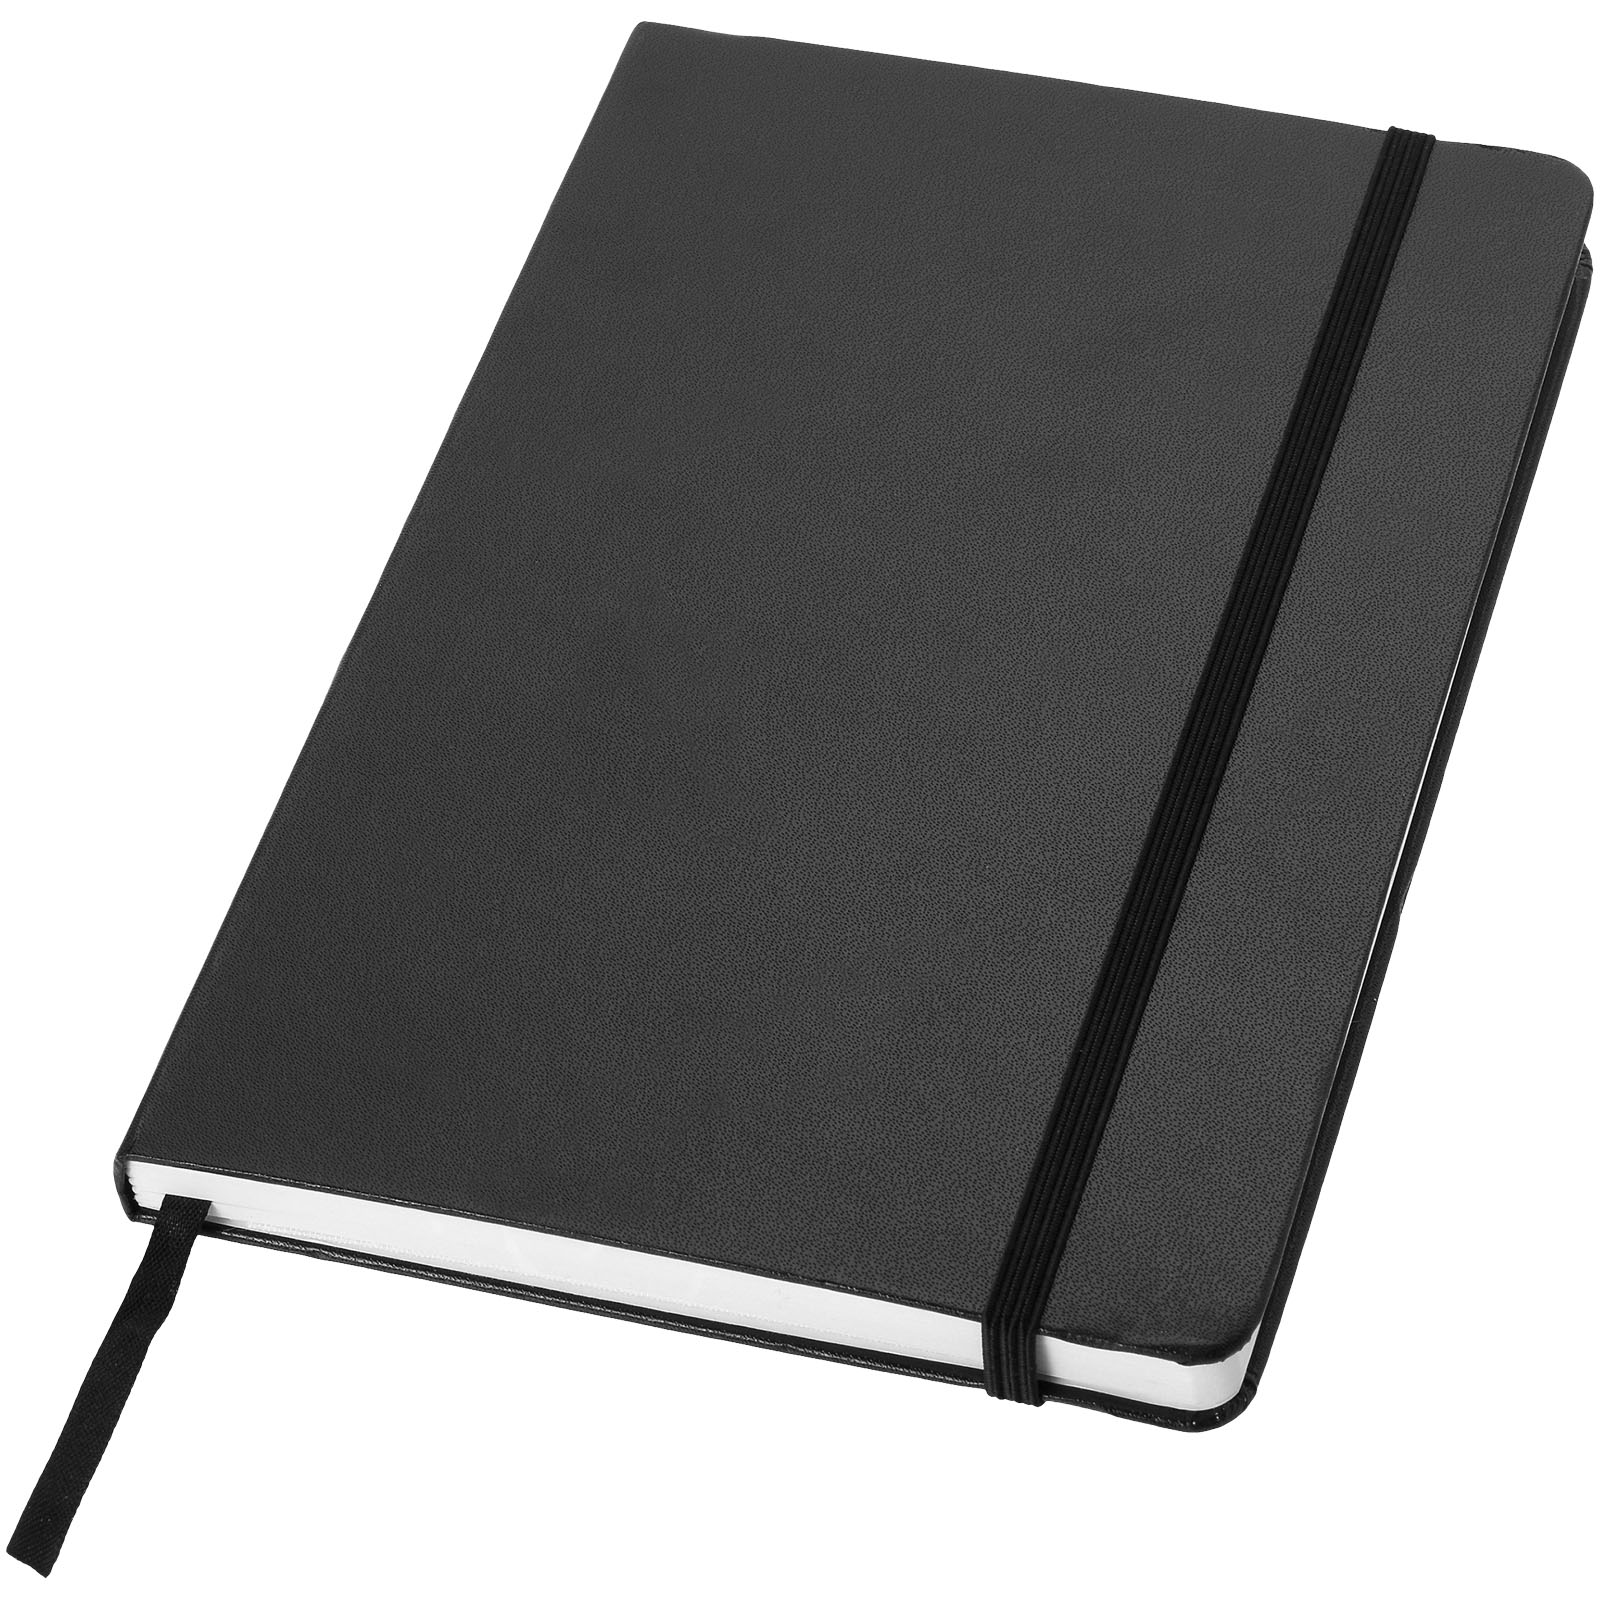 Hard cover notebooks - Classic A5 hard cover notebook